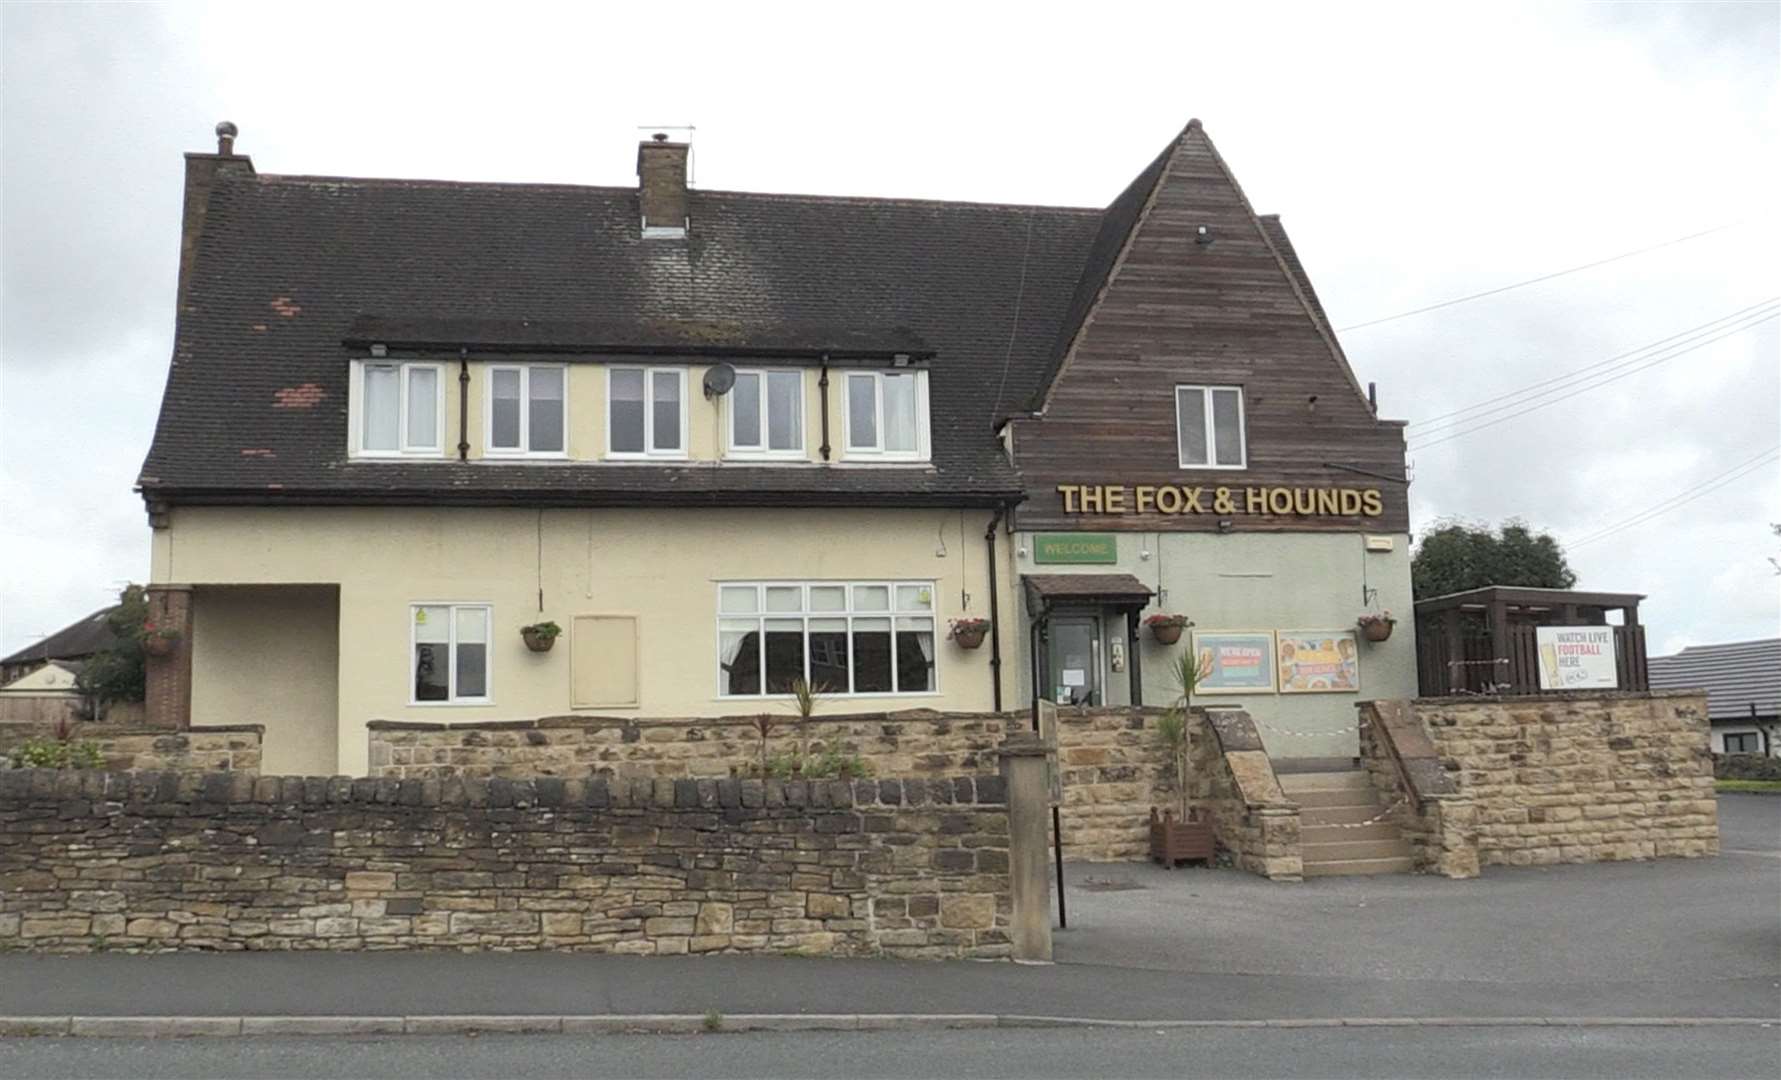 The Fox and Hounds in Batley, West Yorkshire, which said it would be closed until further notice (Richard Mccarthy/PA)